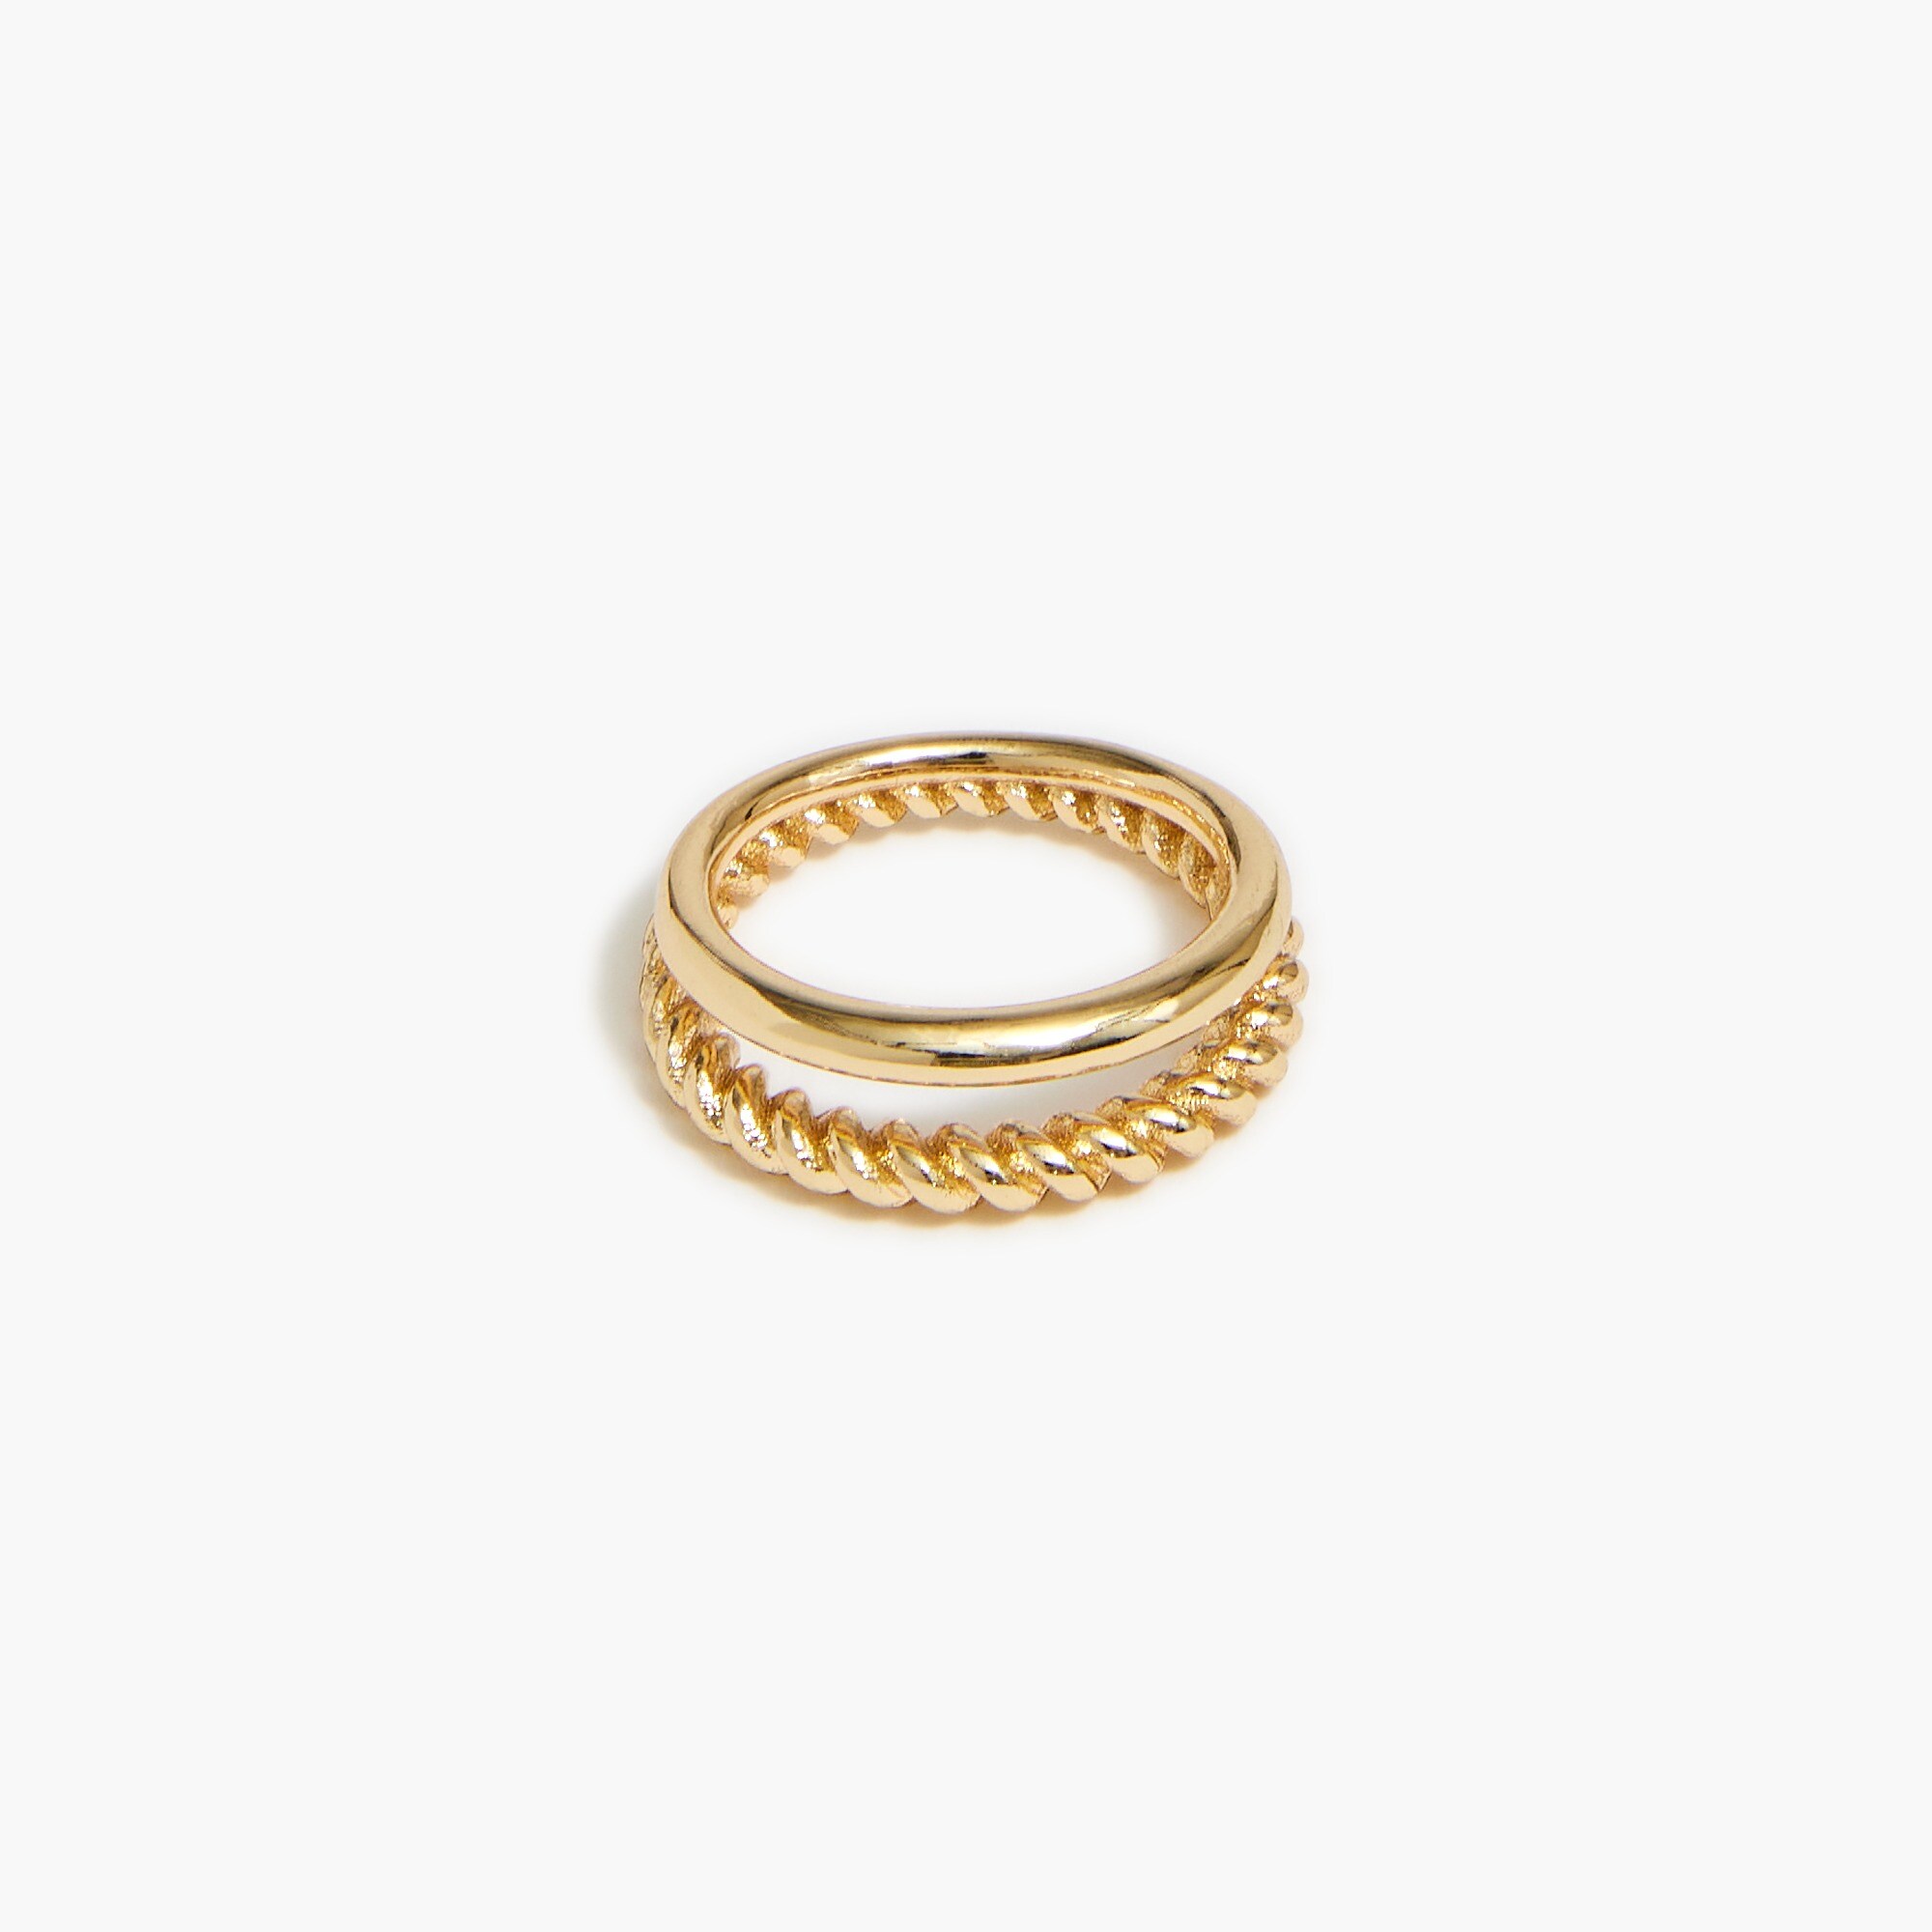  Gold rope ring